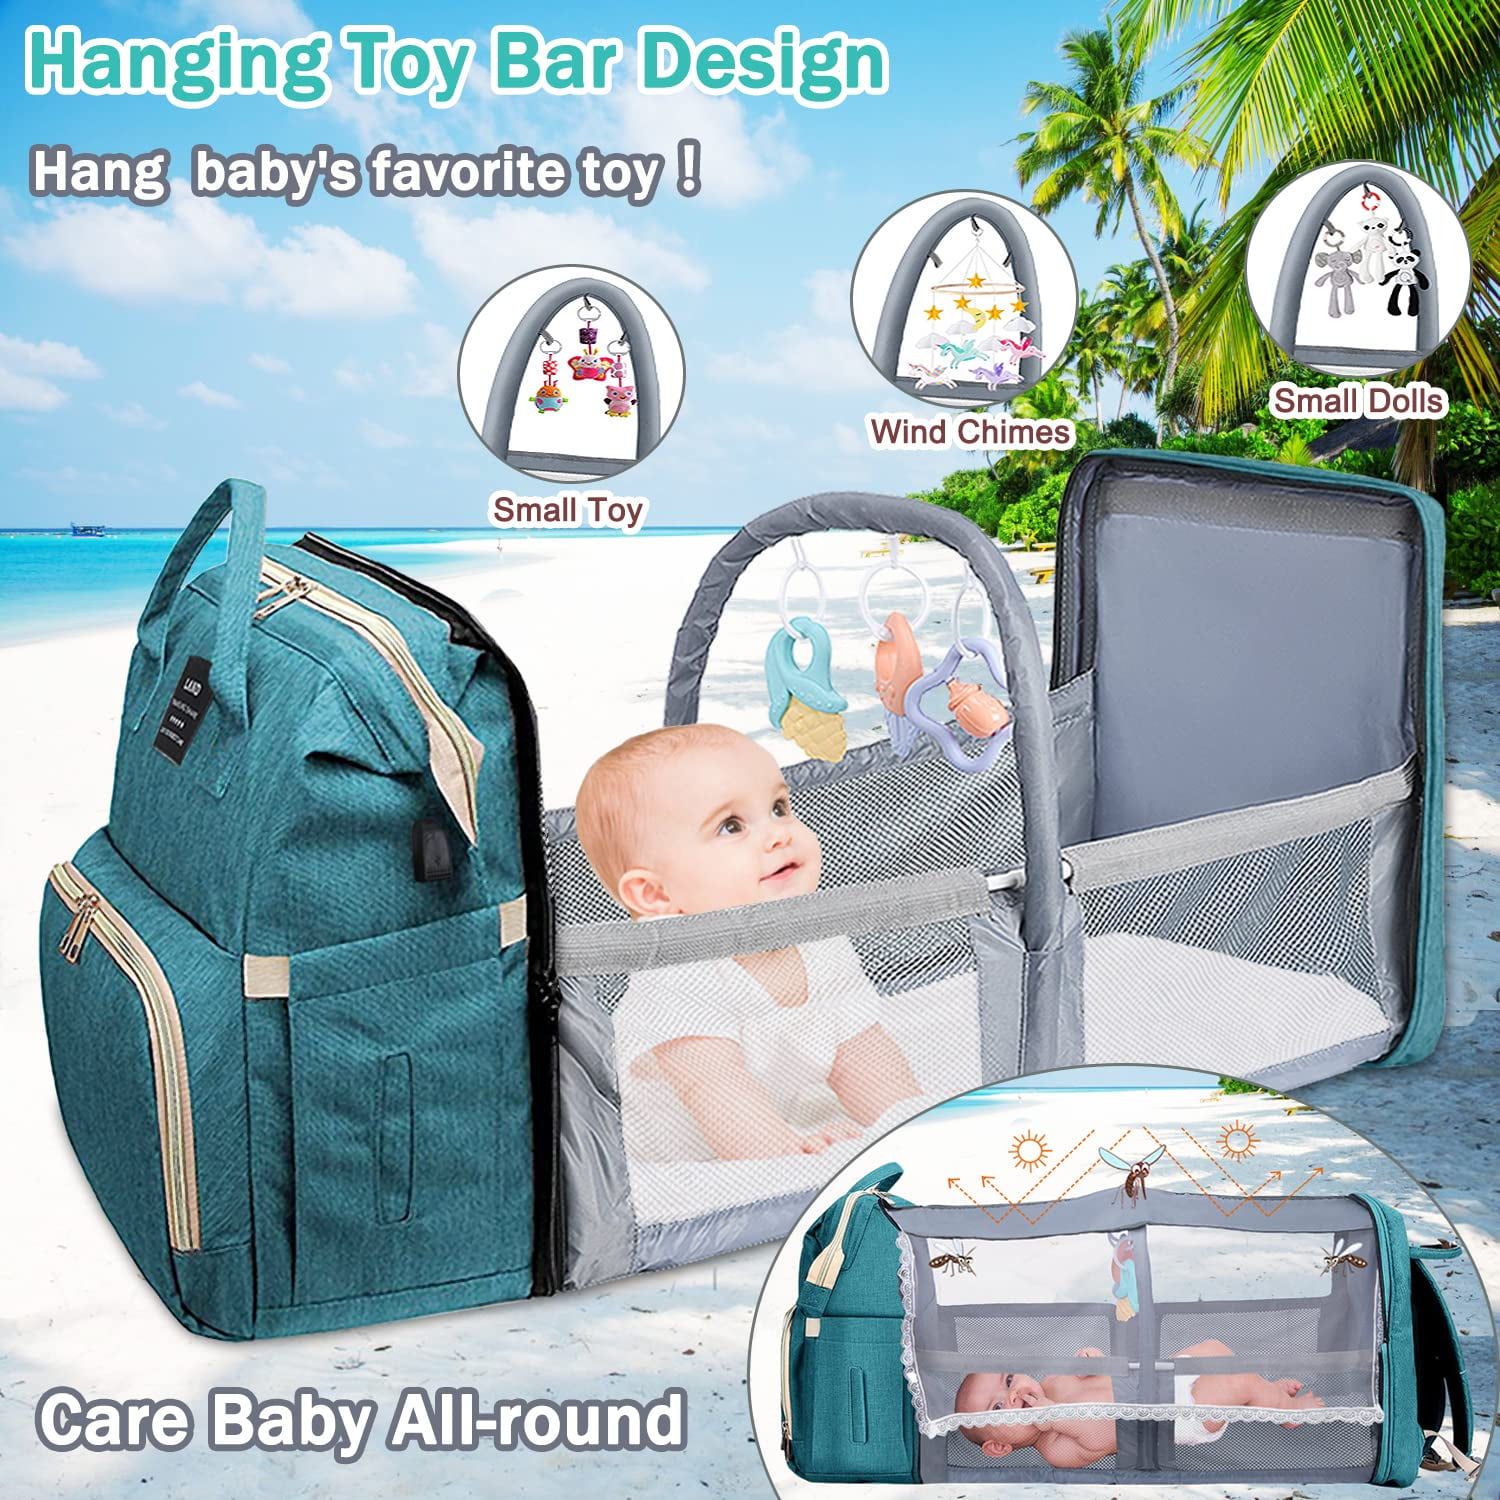 Diaper Bag Backpack, Tntants 6 in 1 Large Diaper Baby Bag with Changing  Station for Boys Girl, Waterproof Baby Diaper Bags for Travel with  Insulated